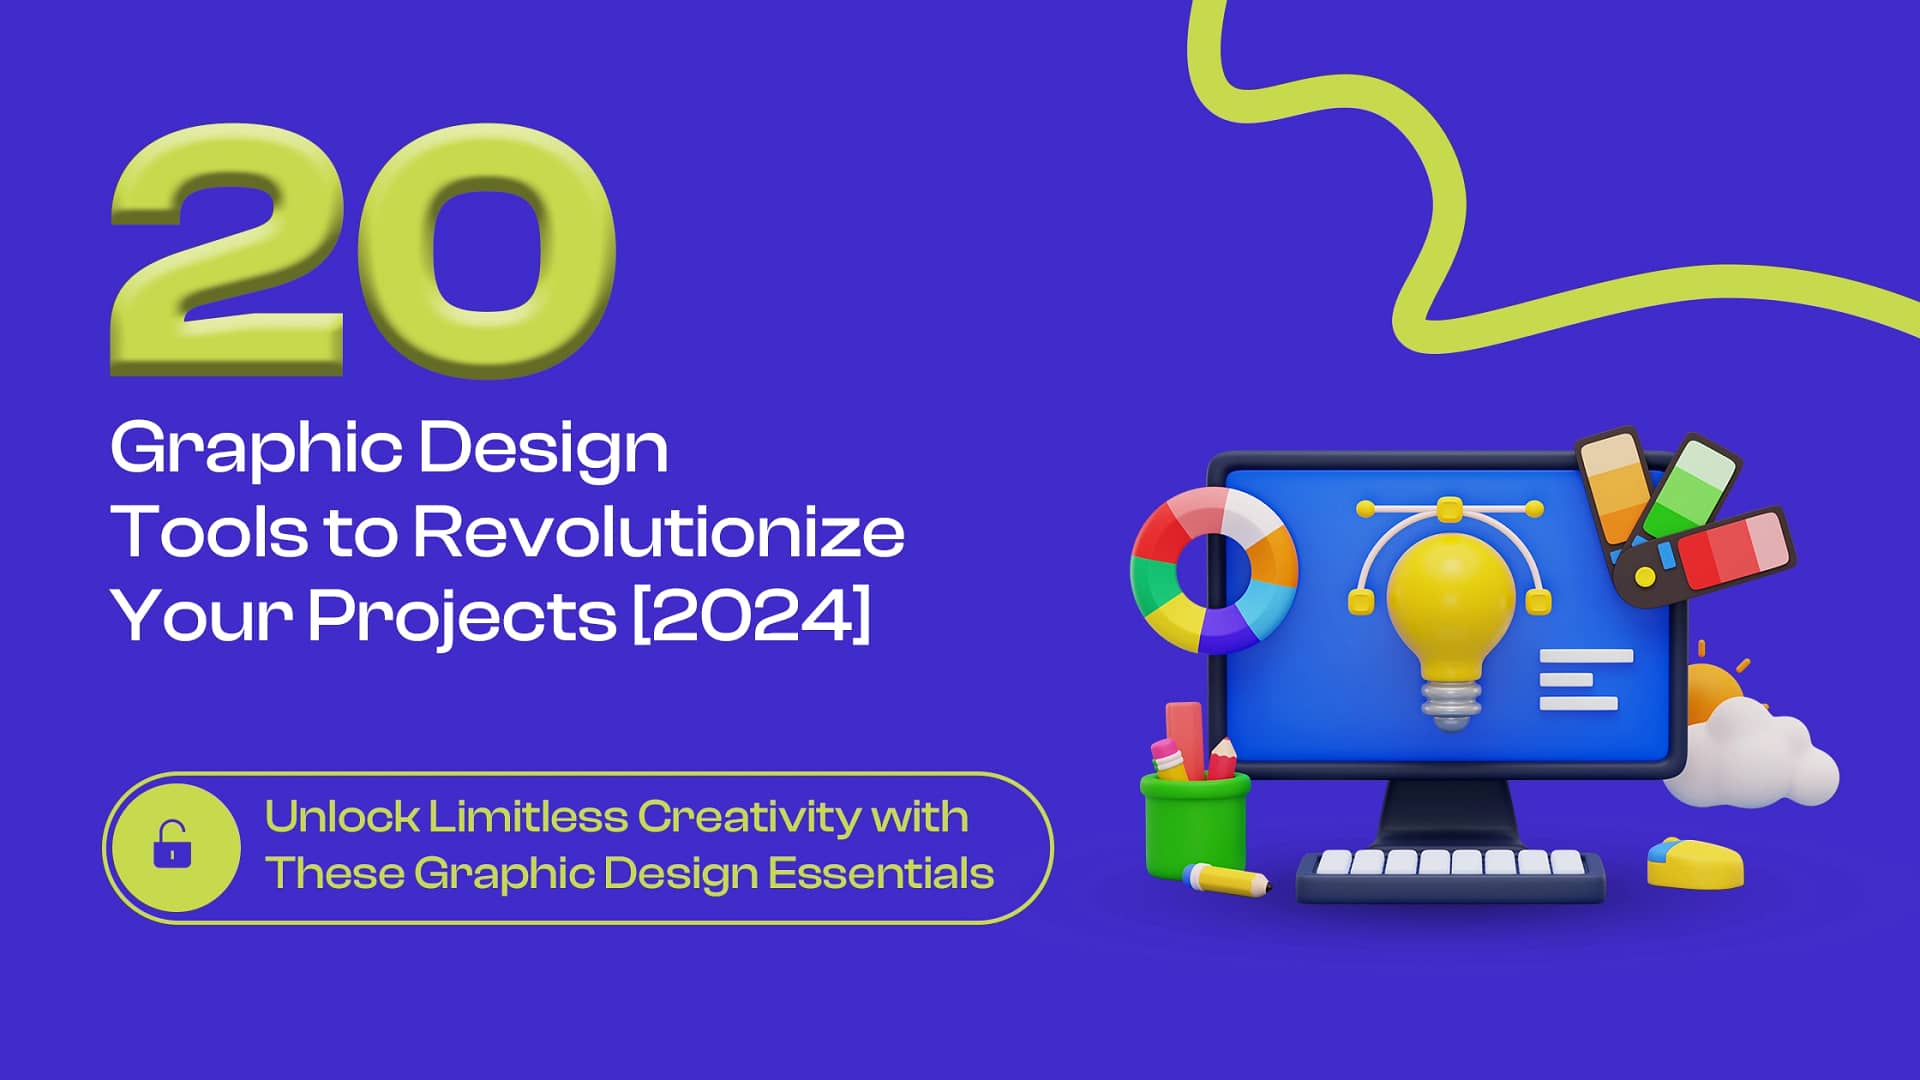 20 Graphic Design Tools to Revolutionize Your Projects [2024]